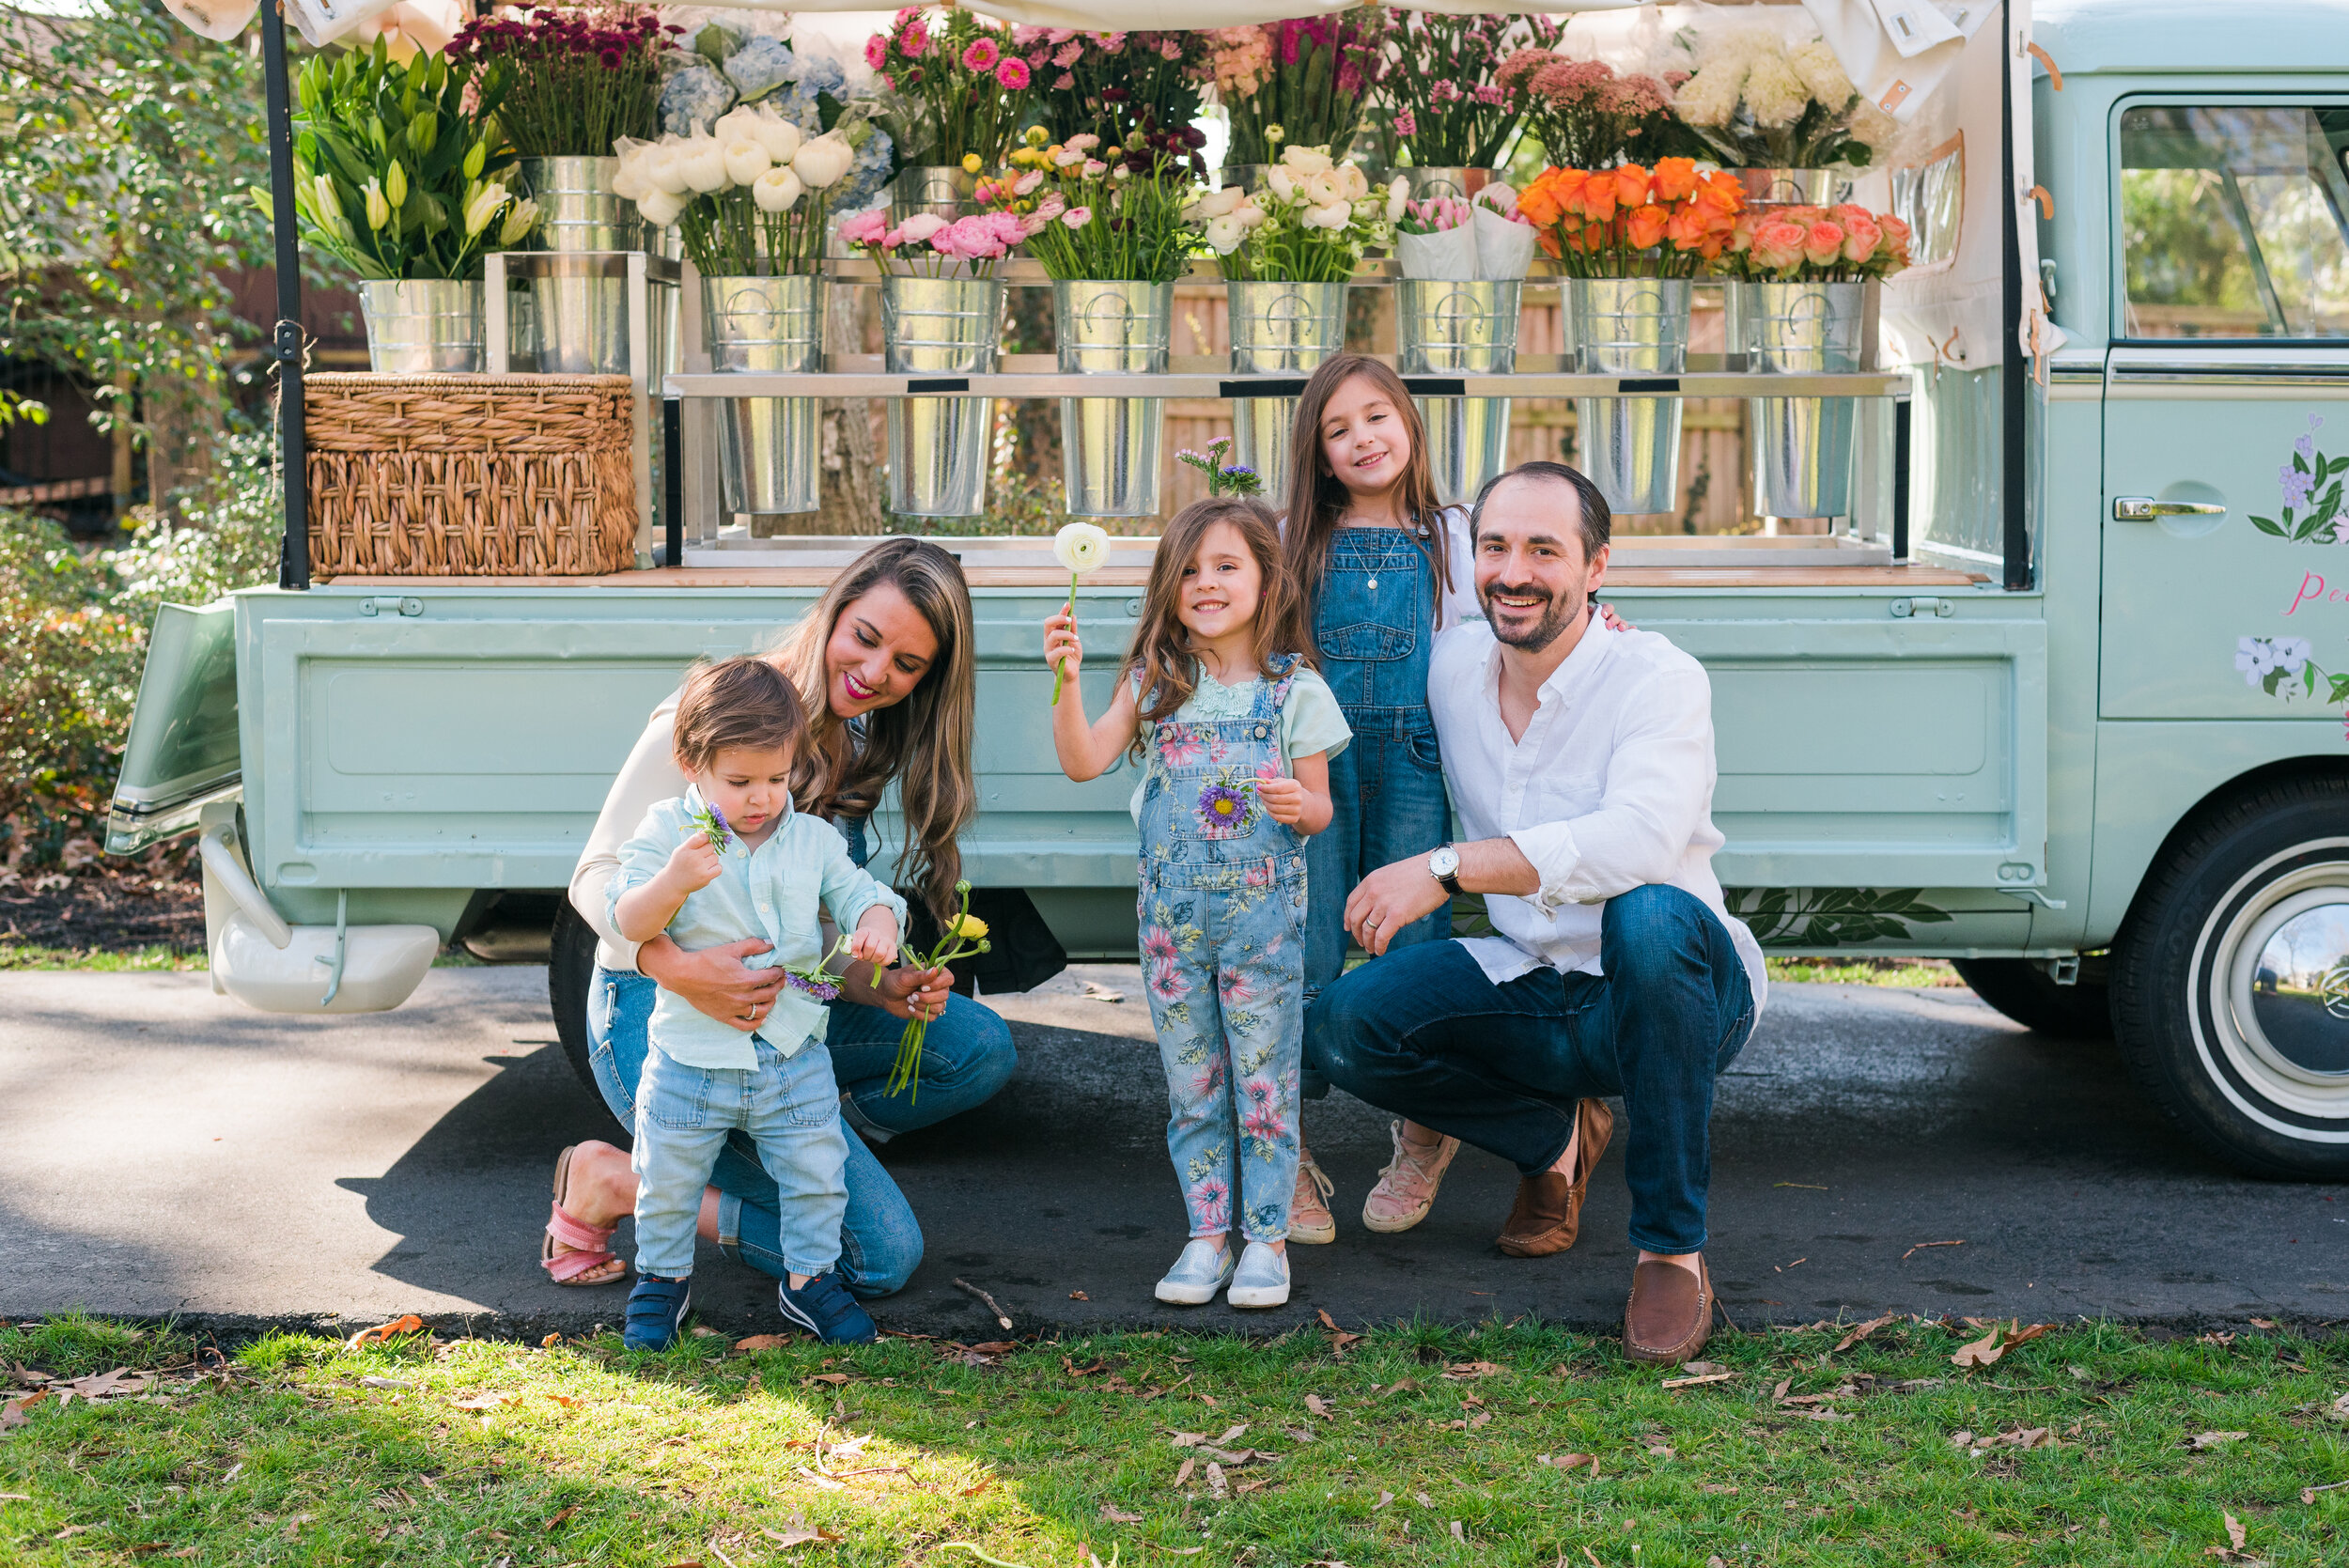 peaceful-petals-flower-truck-maryland-family-session-41.jpg